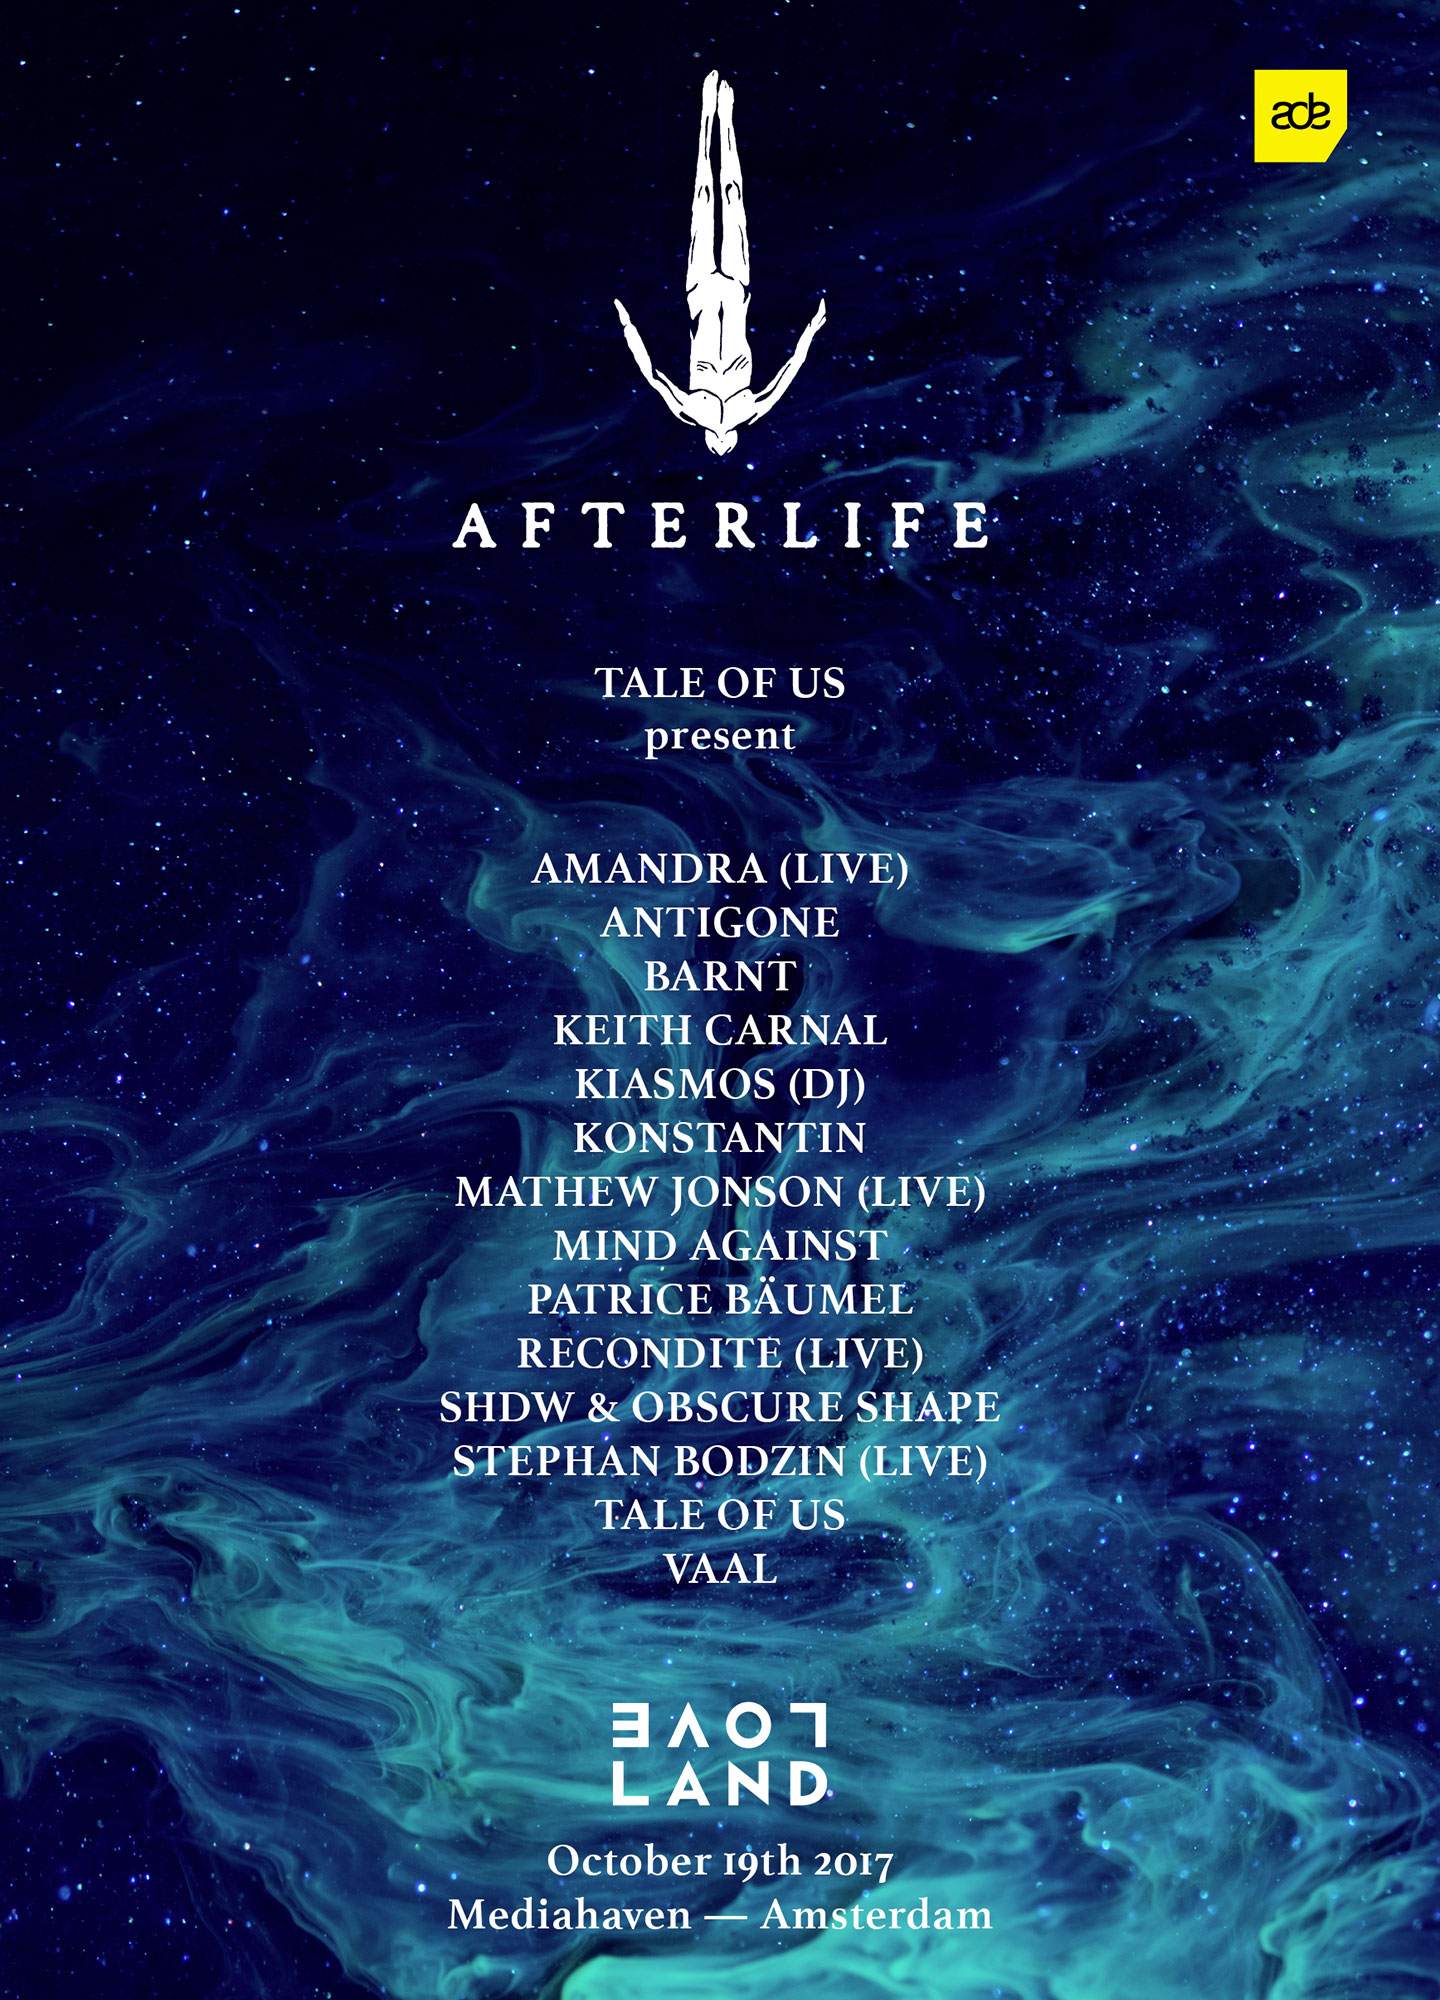 Afterlife returns to ADE in 2017 with Antigone, Barnt image